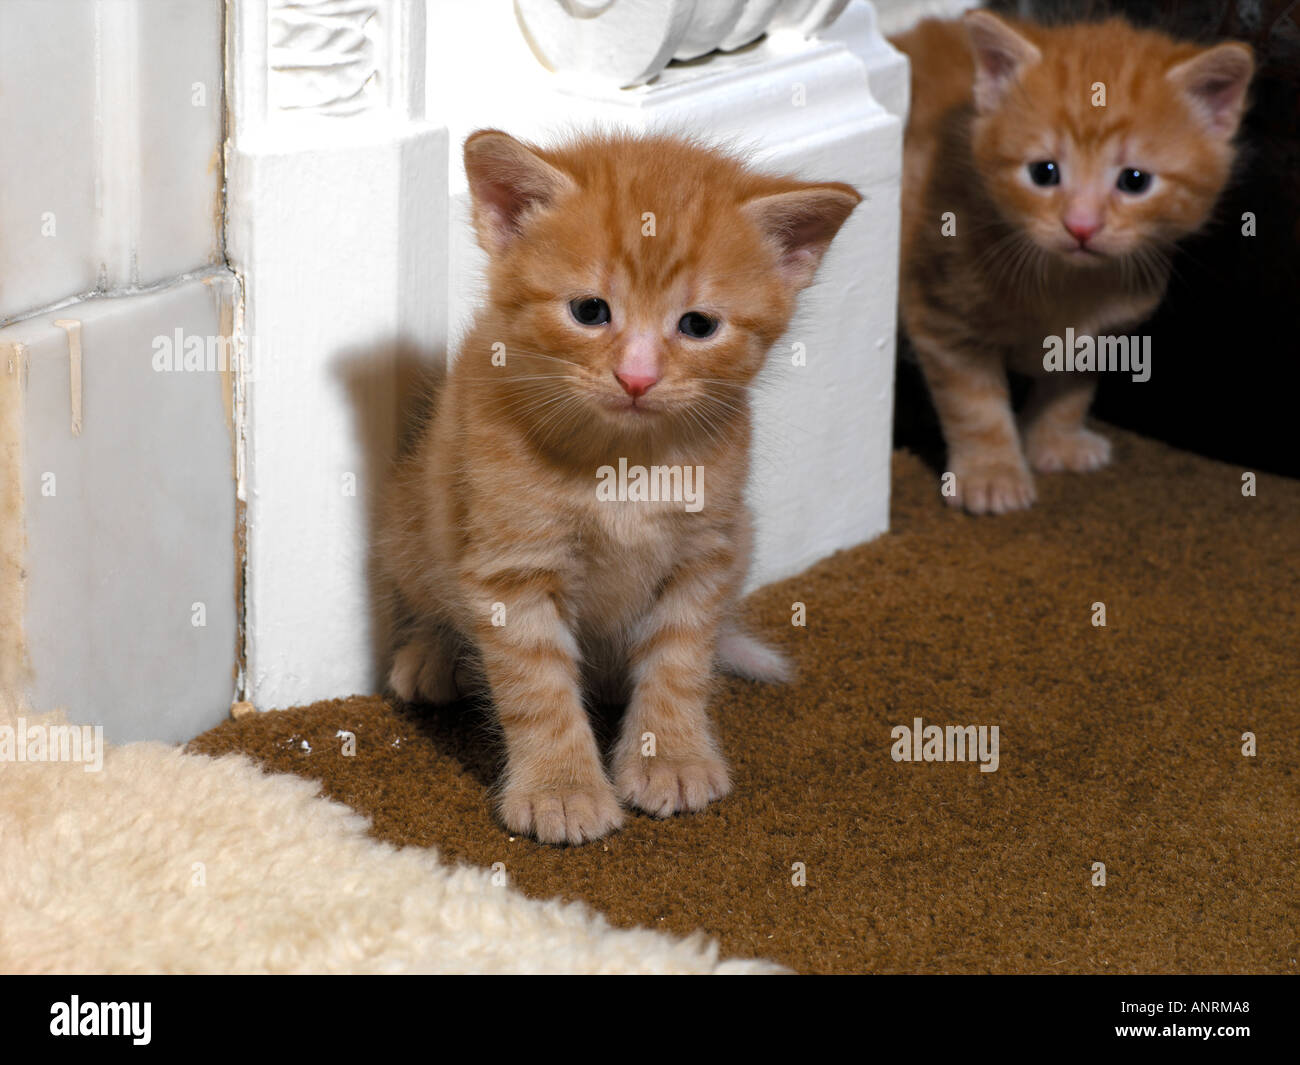 Two Ginger Kittens Three Weeks Old Stock Photo